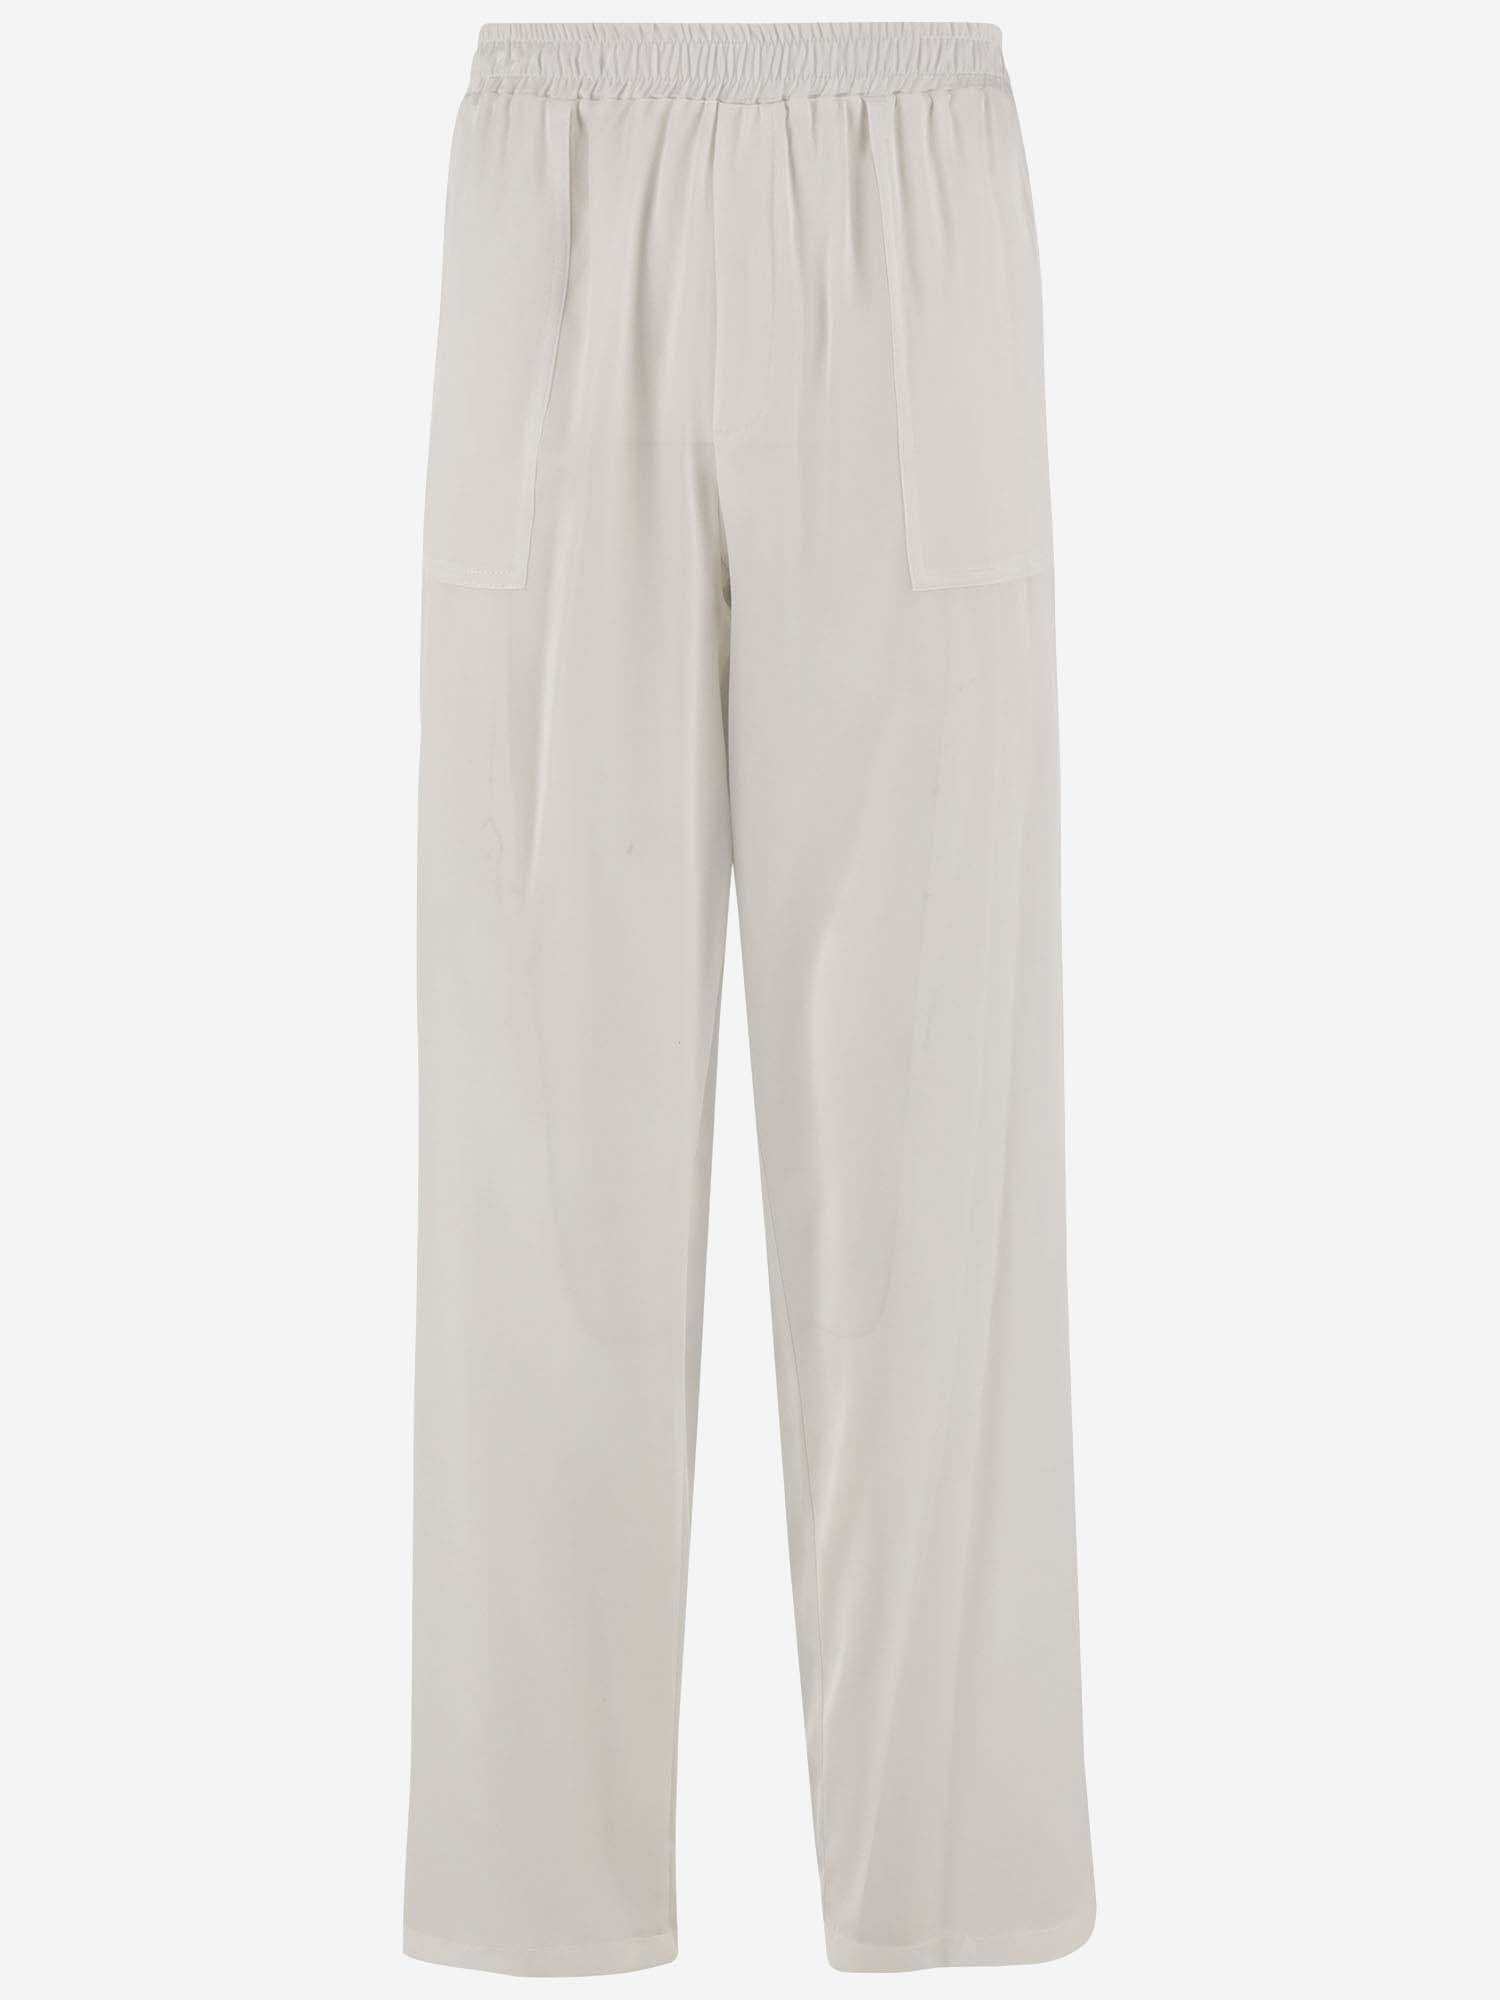 Wild Cashmere Stretch Silk Pants In Gray